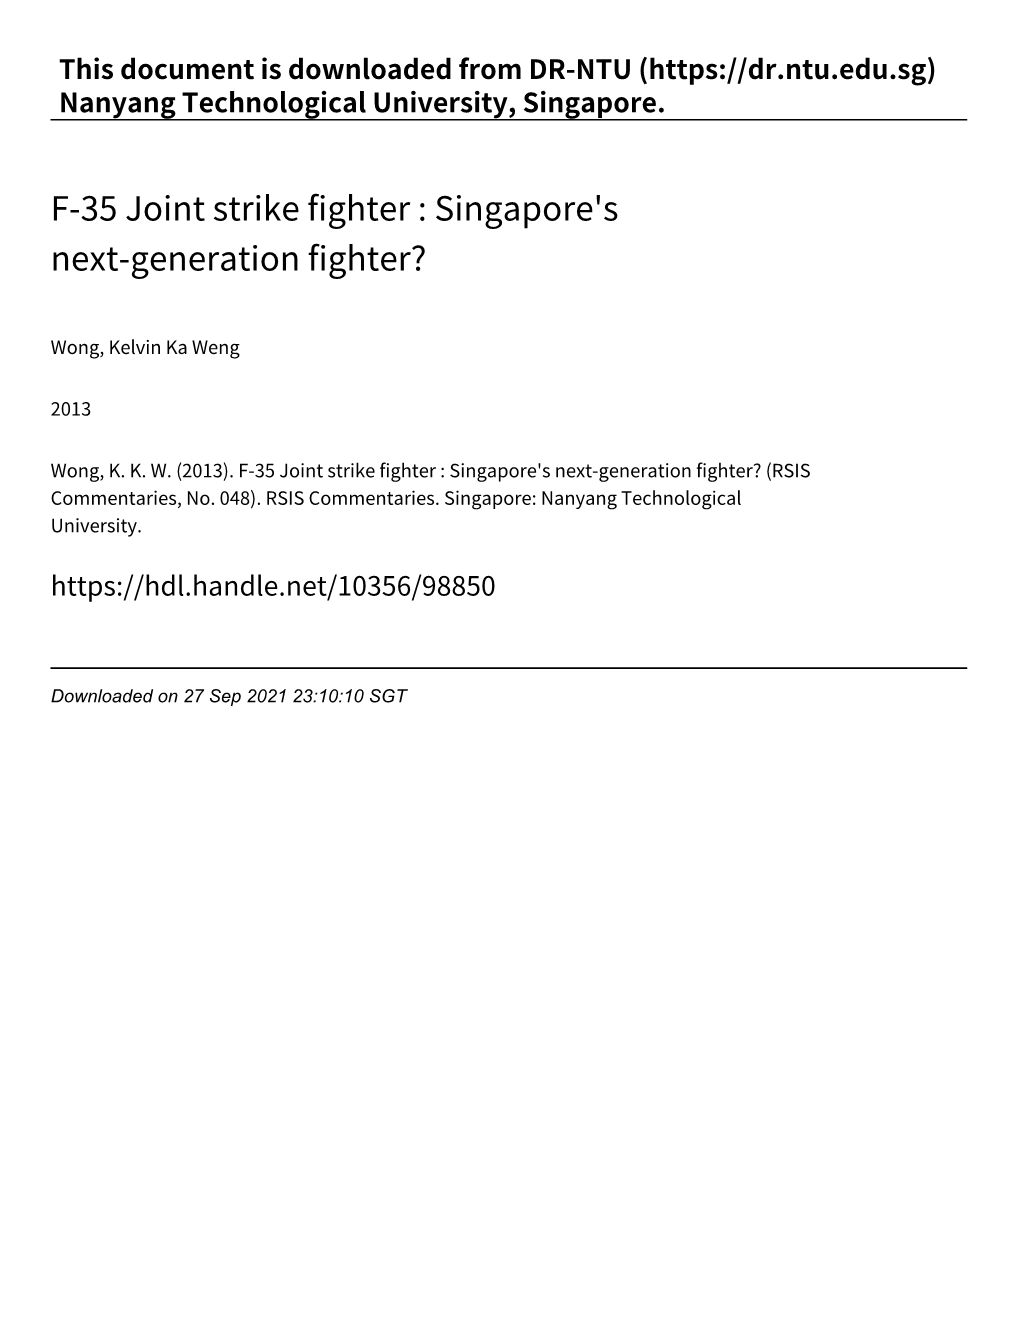 F‑35 Joint Strike Fighter : Singapore's Next‑Generation Fighter?